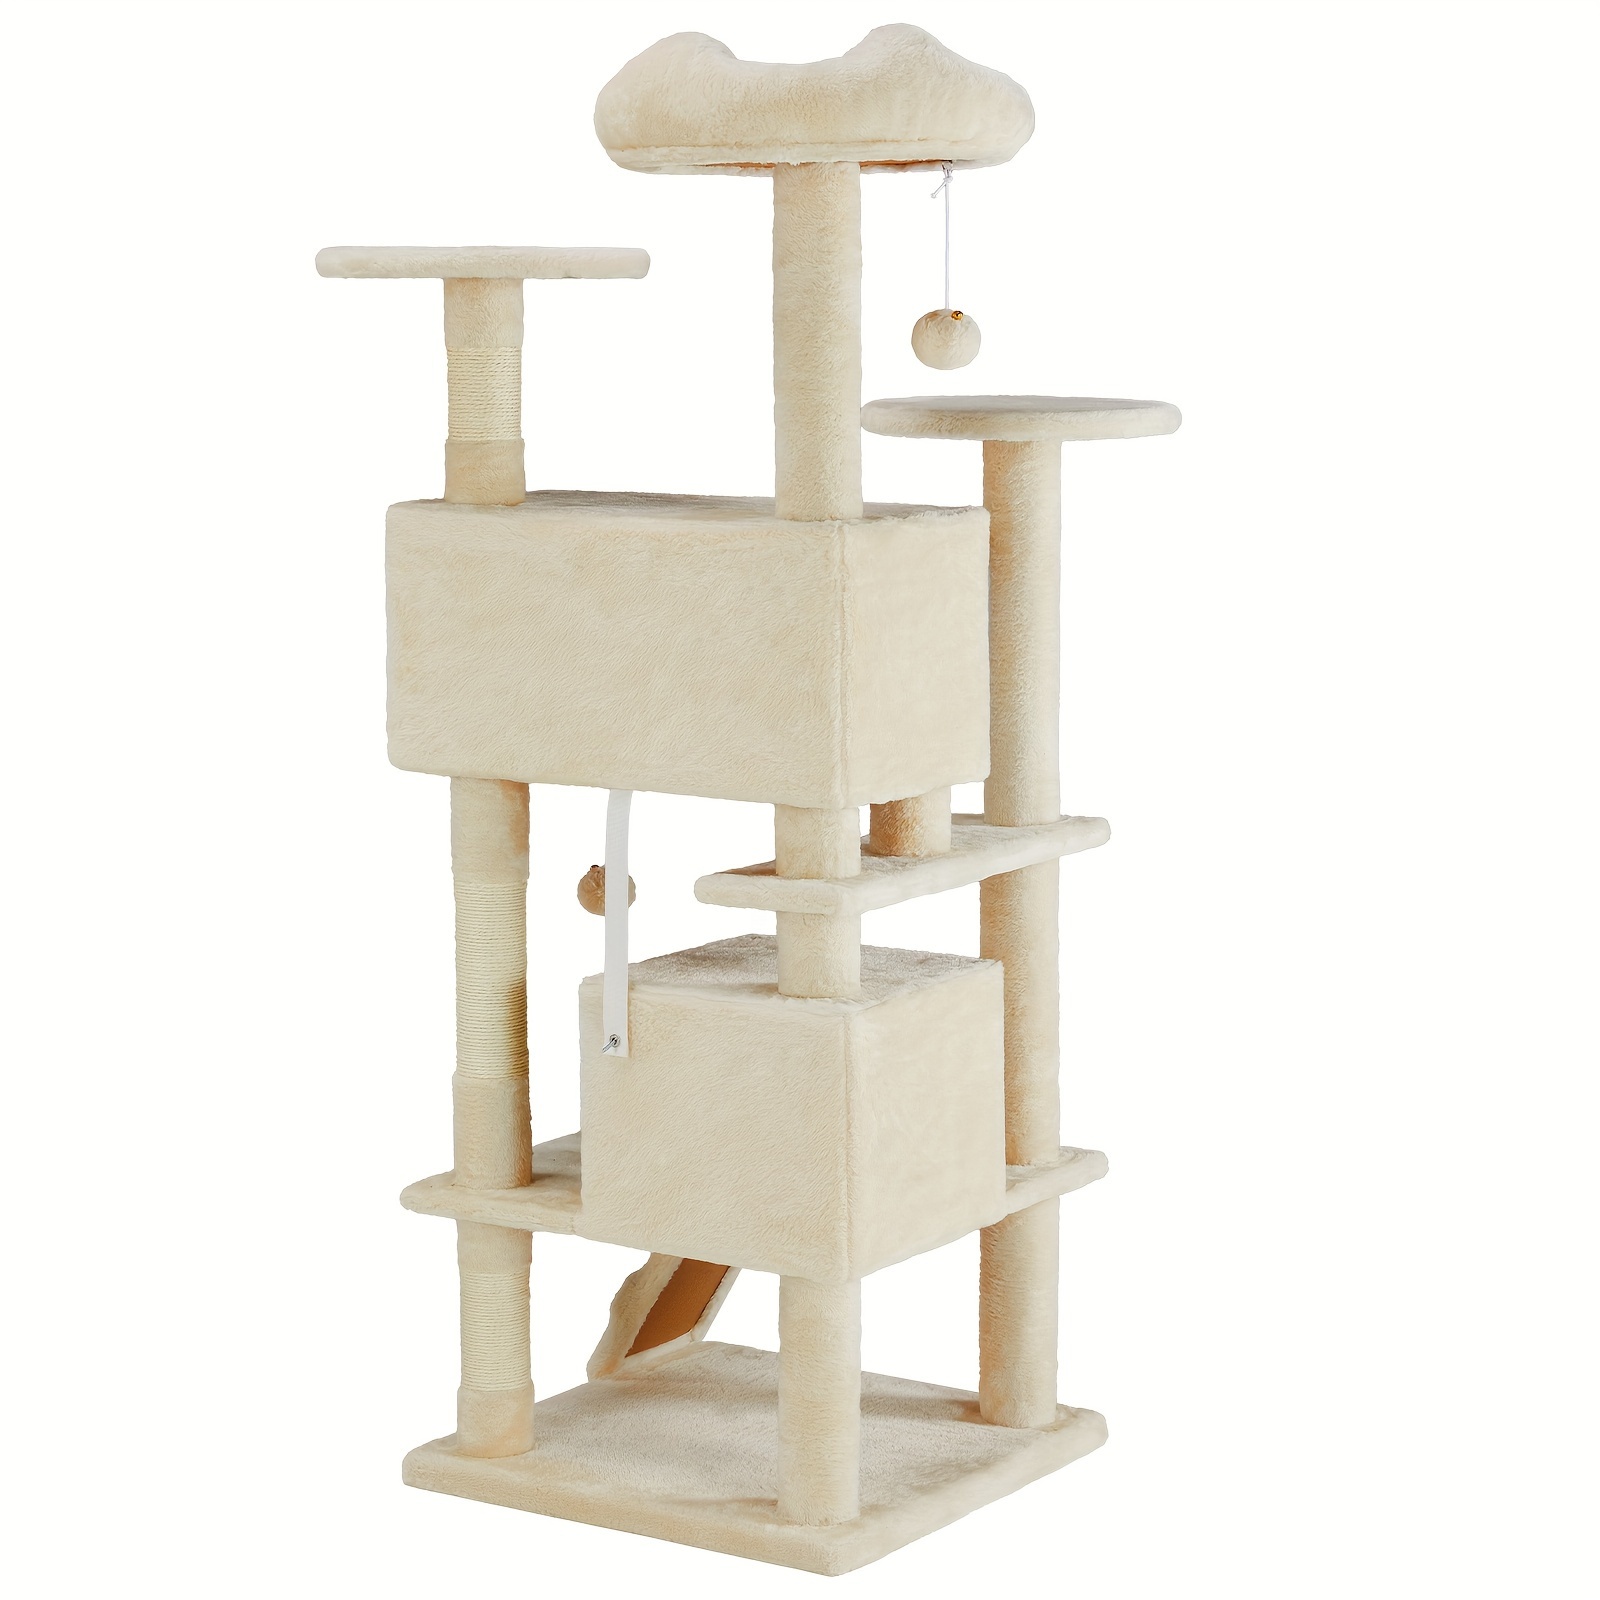 

Cat Tree, 54in Modern Multi-level Cat Tree Tower With Sisal-covered Scratching Posts And Cozy Perches For Indoor Cats, Anti-tilt